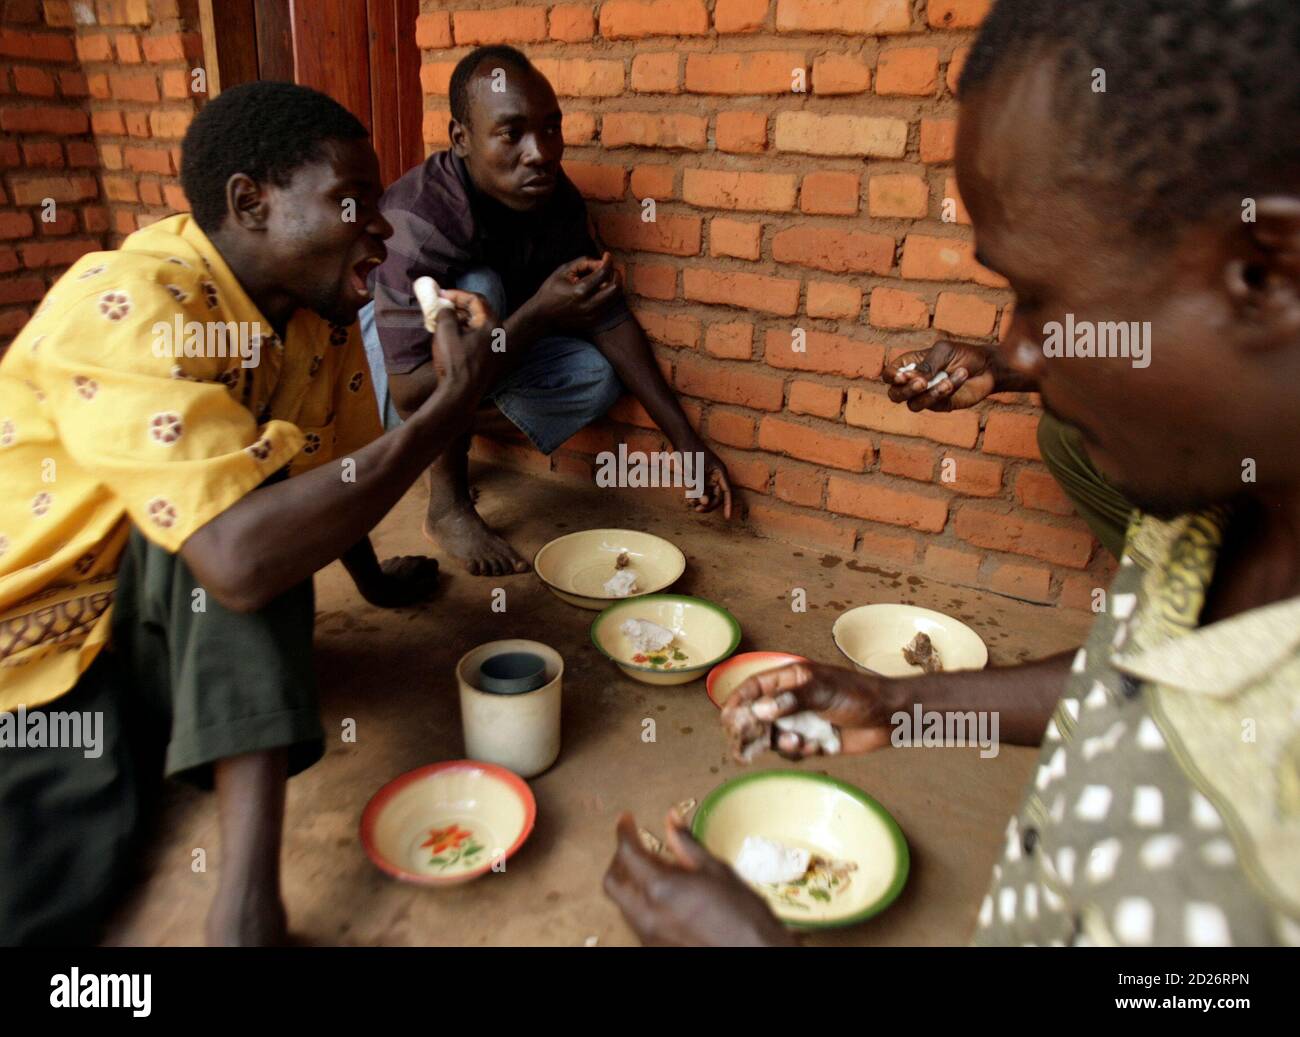 Yohane Banda (C), David Banda's father, shares a meal with his cousins at  his home in Lipunga village about 170 km (106 miles) west of Lilongwe May  11, 2008. U.S. pop star